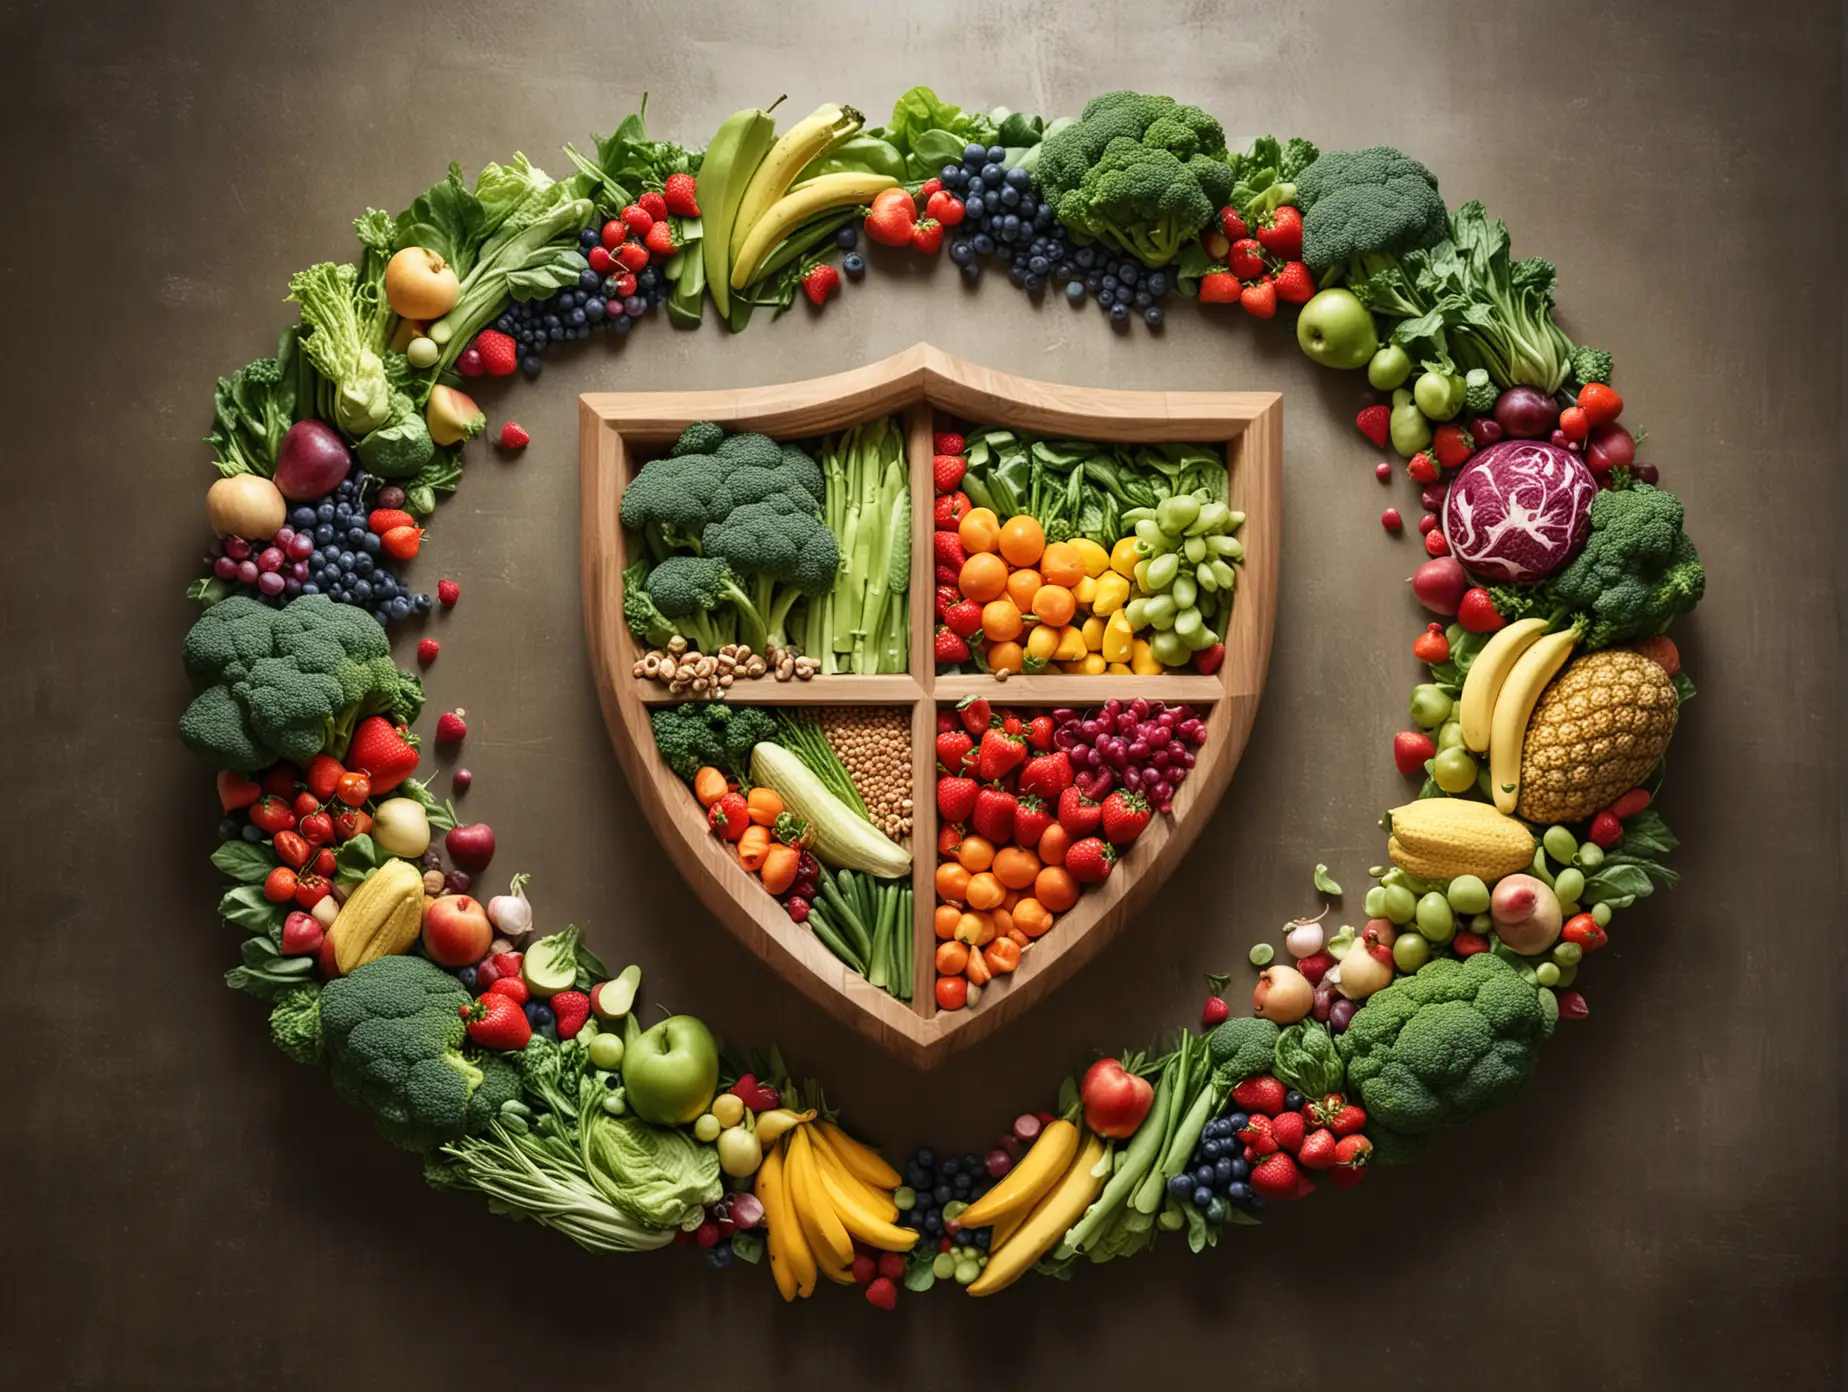 Create an image of a healthy body shielded by a powerful shield, symbolizing the prevention of cancer through the use of glutathione and enzymes. The shield can be decorated with images of fruits and vegetables, highlighting the importance of healthy eating habits in cancer prevention. Surround the shield with beams of light, representing the positive effects that these supplements can have on the body's immune system. Finally, include a tagline below the image that reads "Empower Your Body with Glutathione and Enzymes."